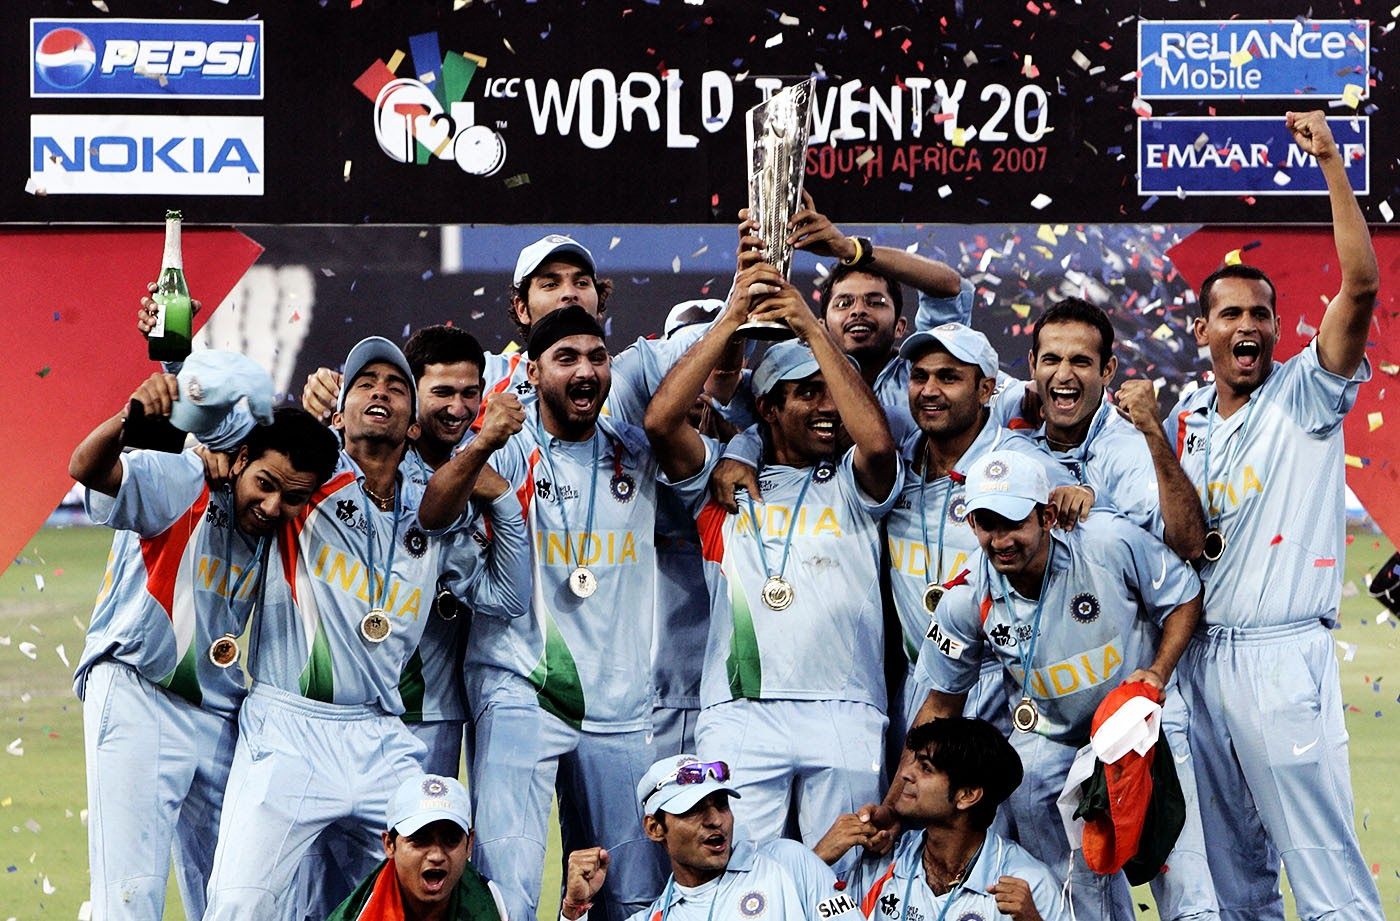 Winners of 1st Edition of ICC Men’s T20 World Cup